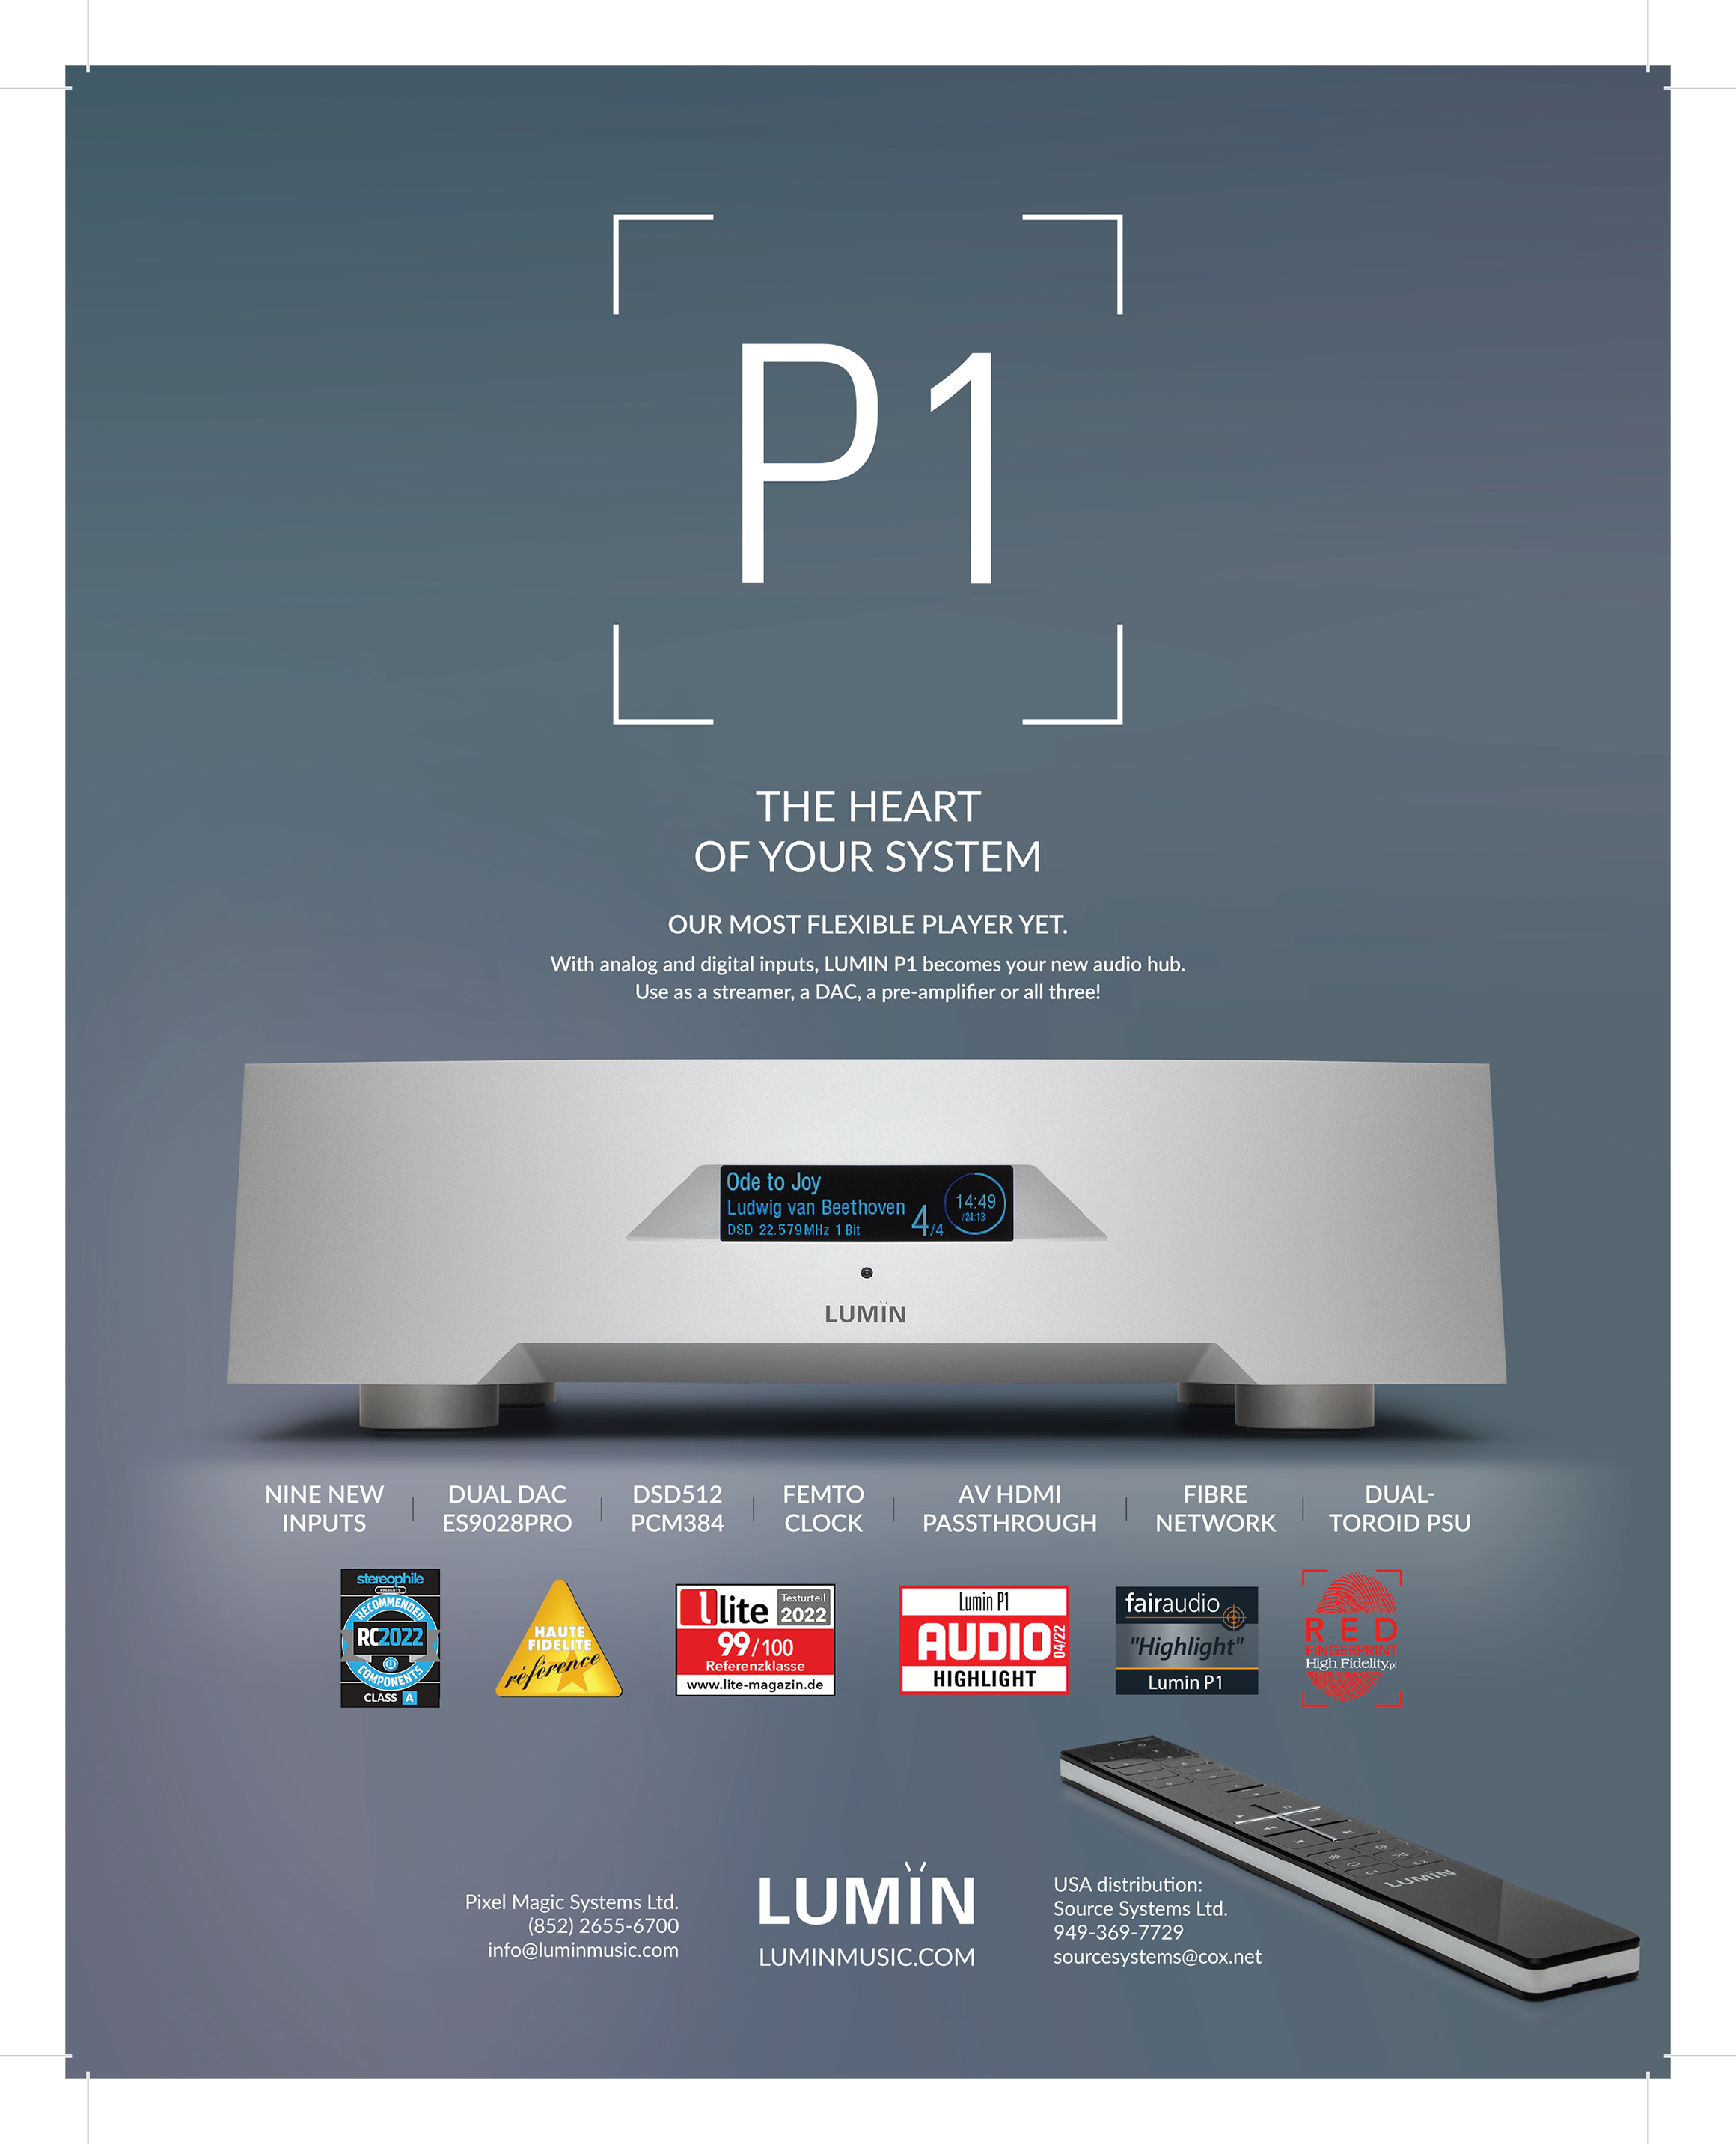 Lumin P1 Stereophile